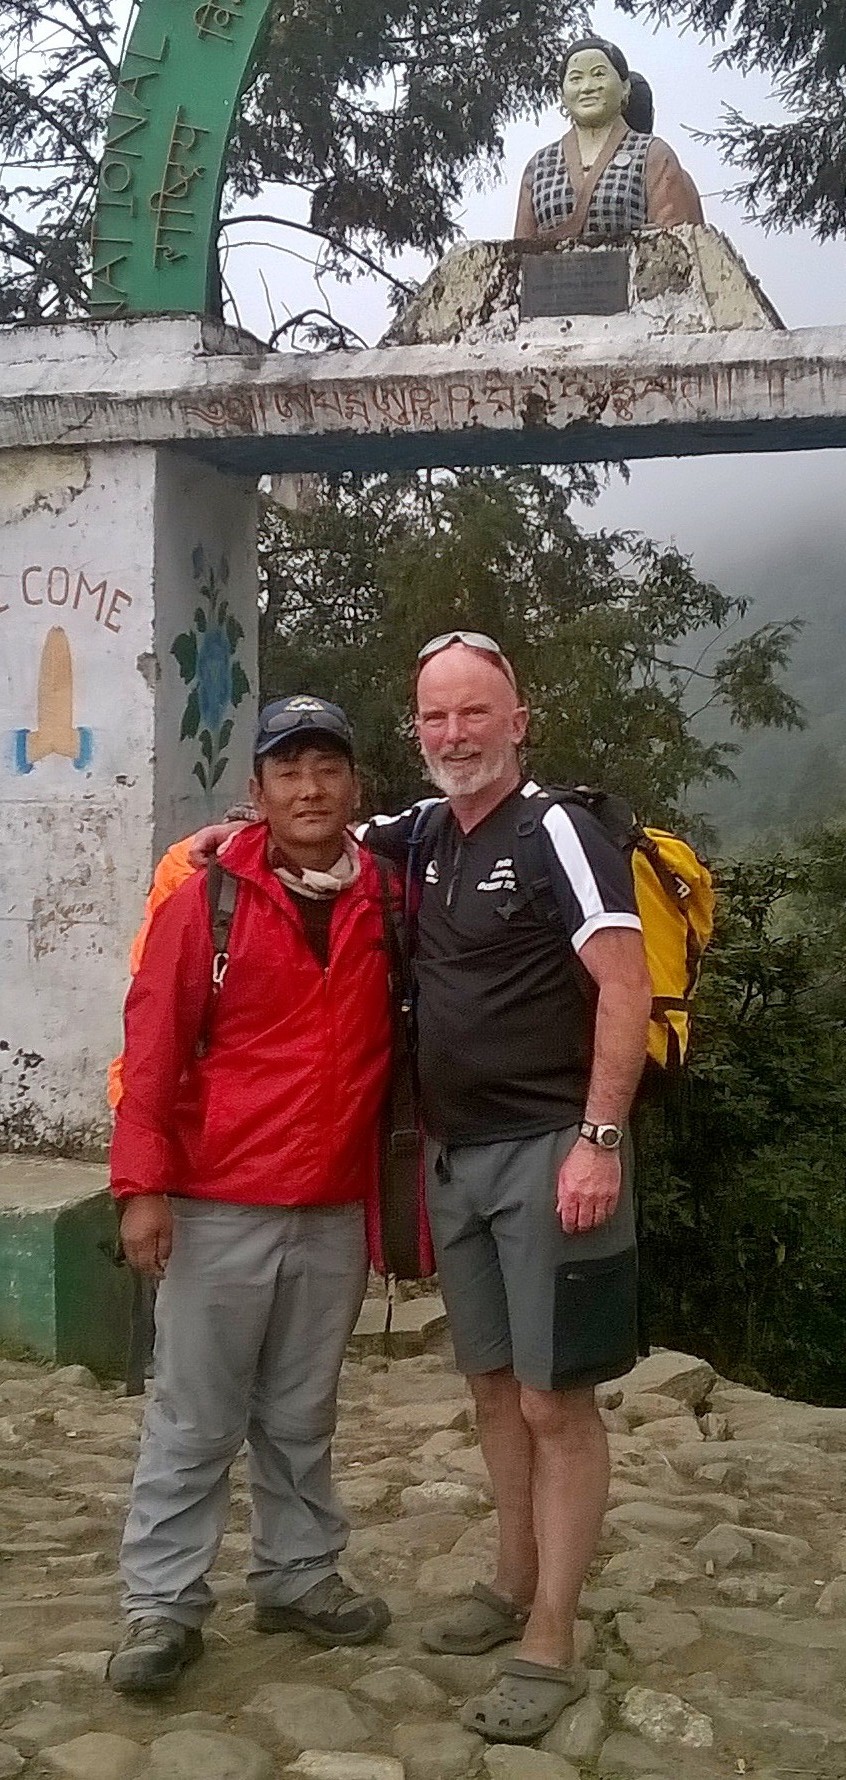 At the start of the Everest trail